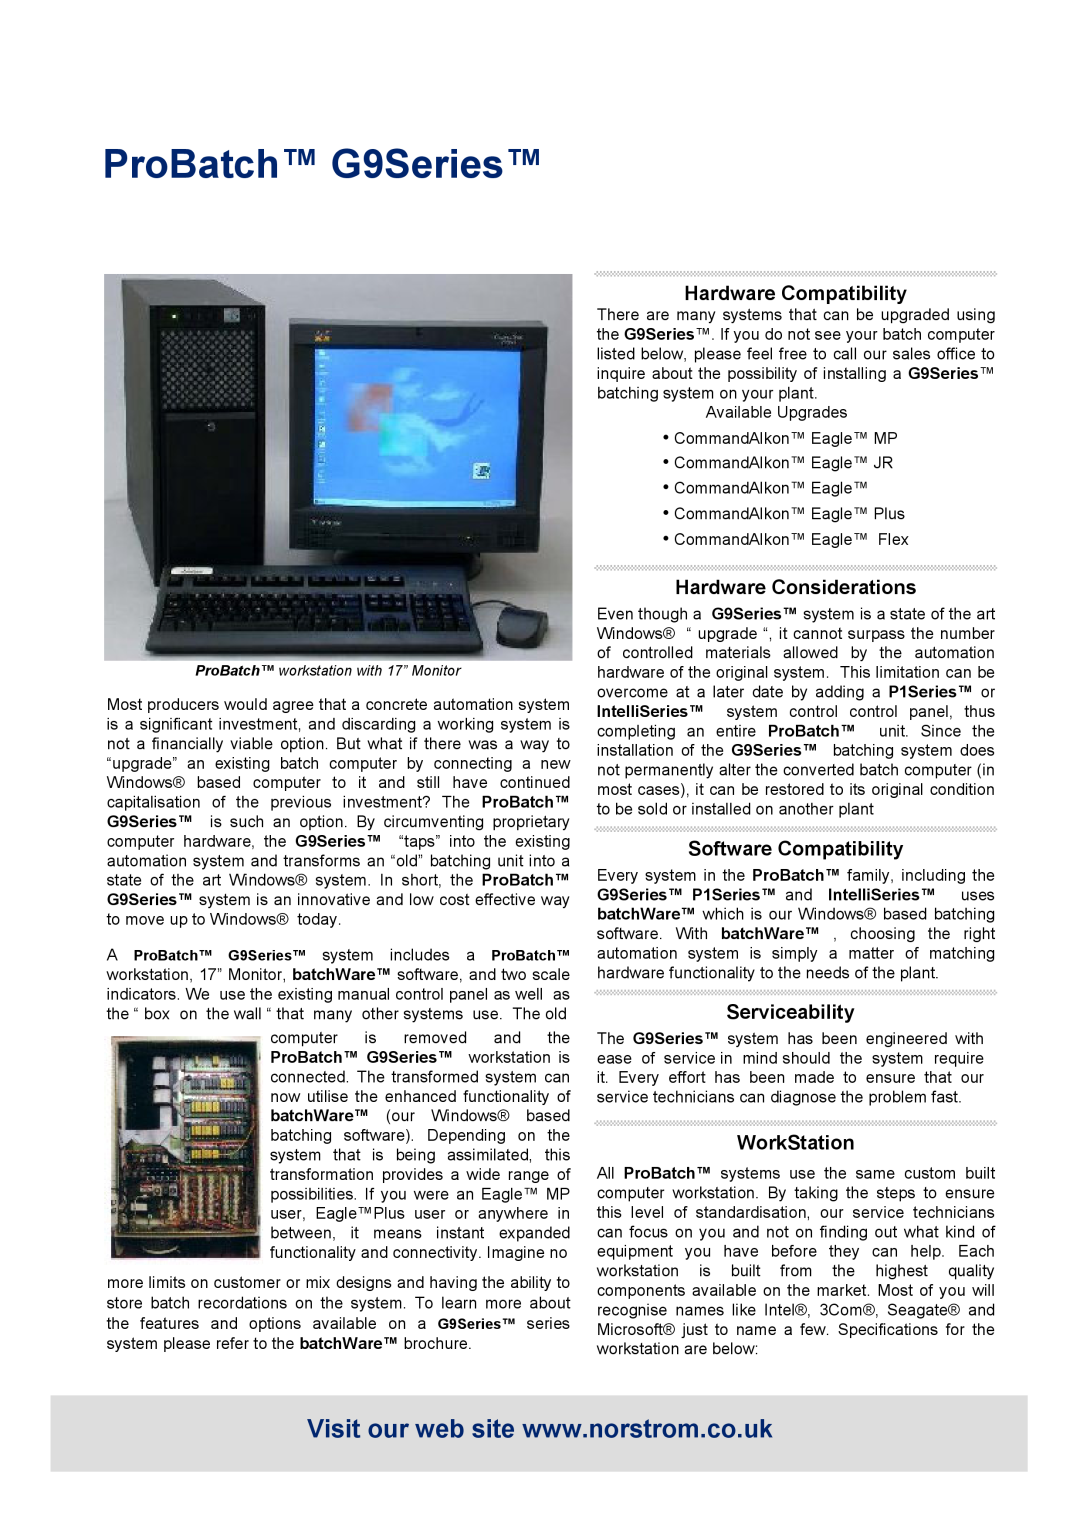 Oki brochure ProBatch G9Series, Hardware Compatibility, Hardware Considerations, Software Compatibility, Serviceability 